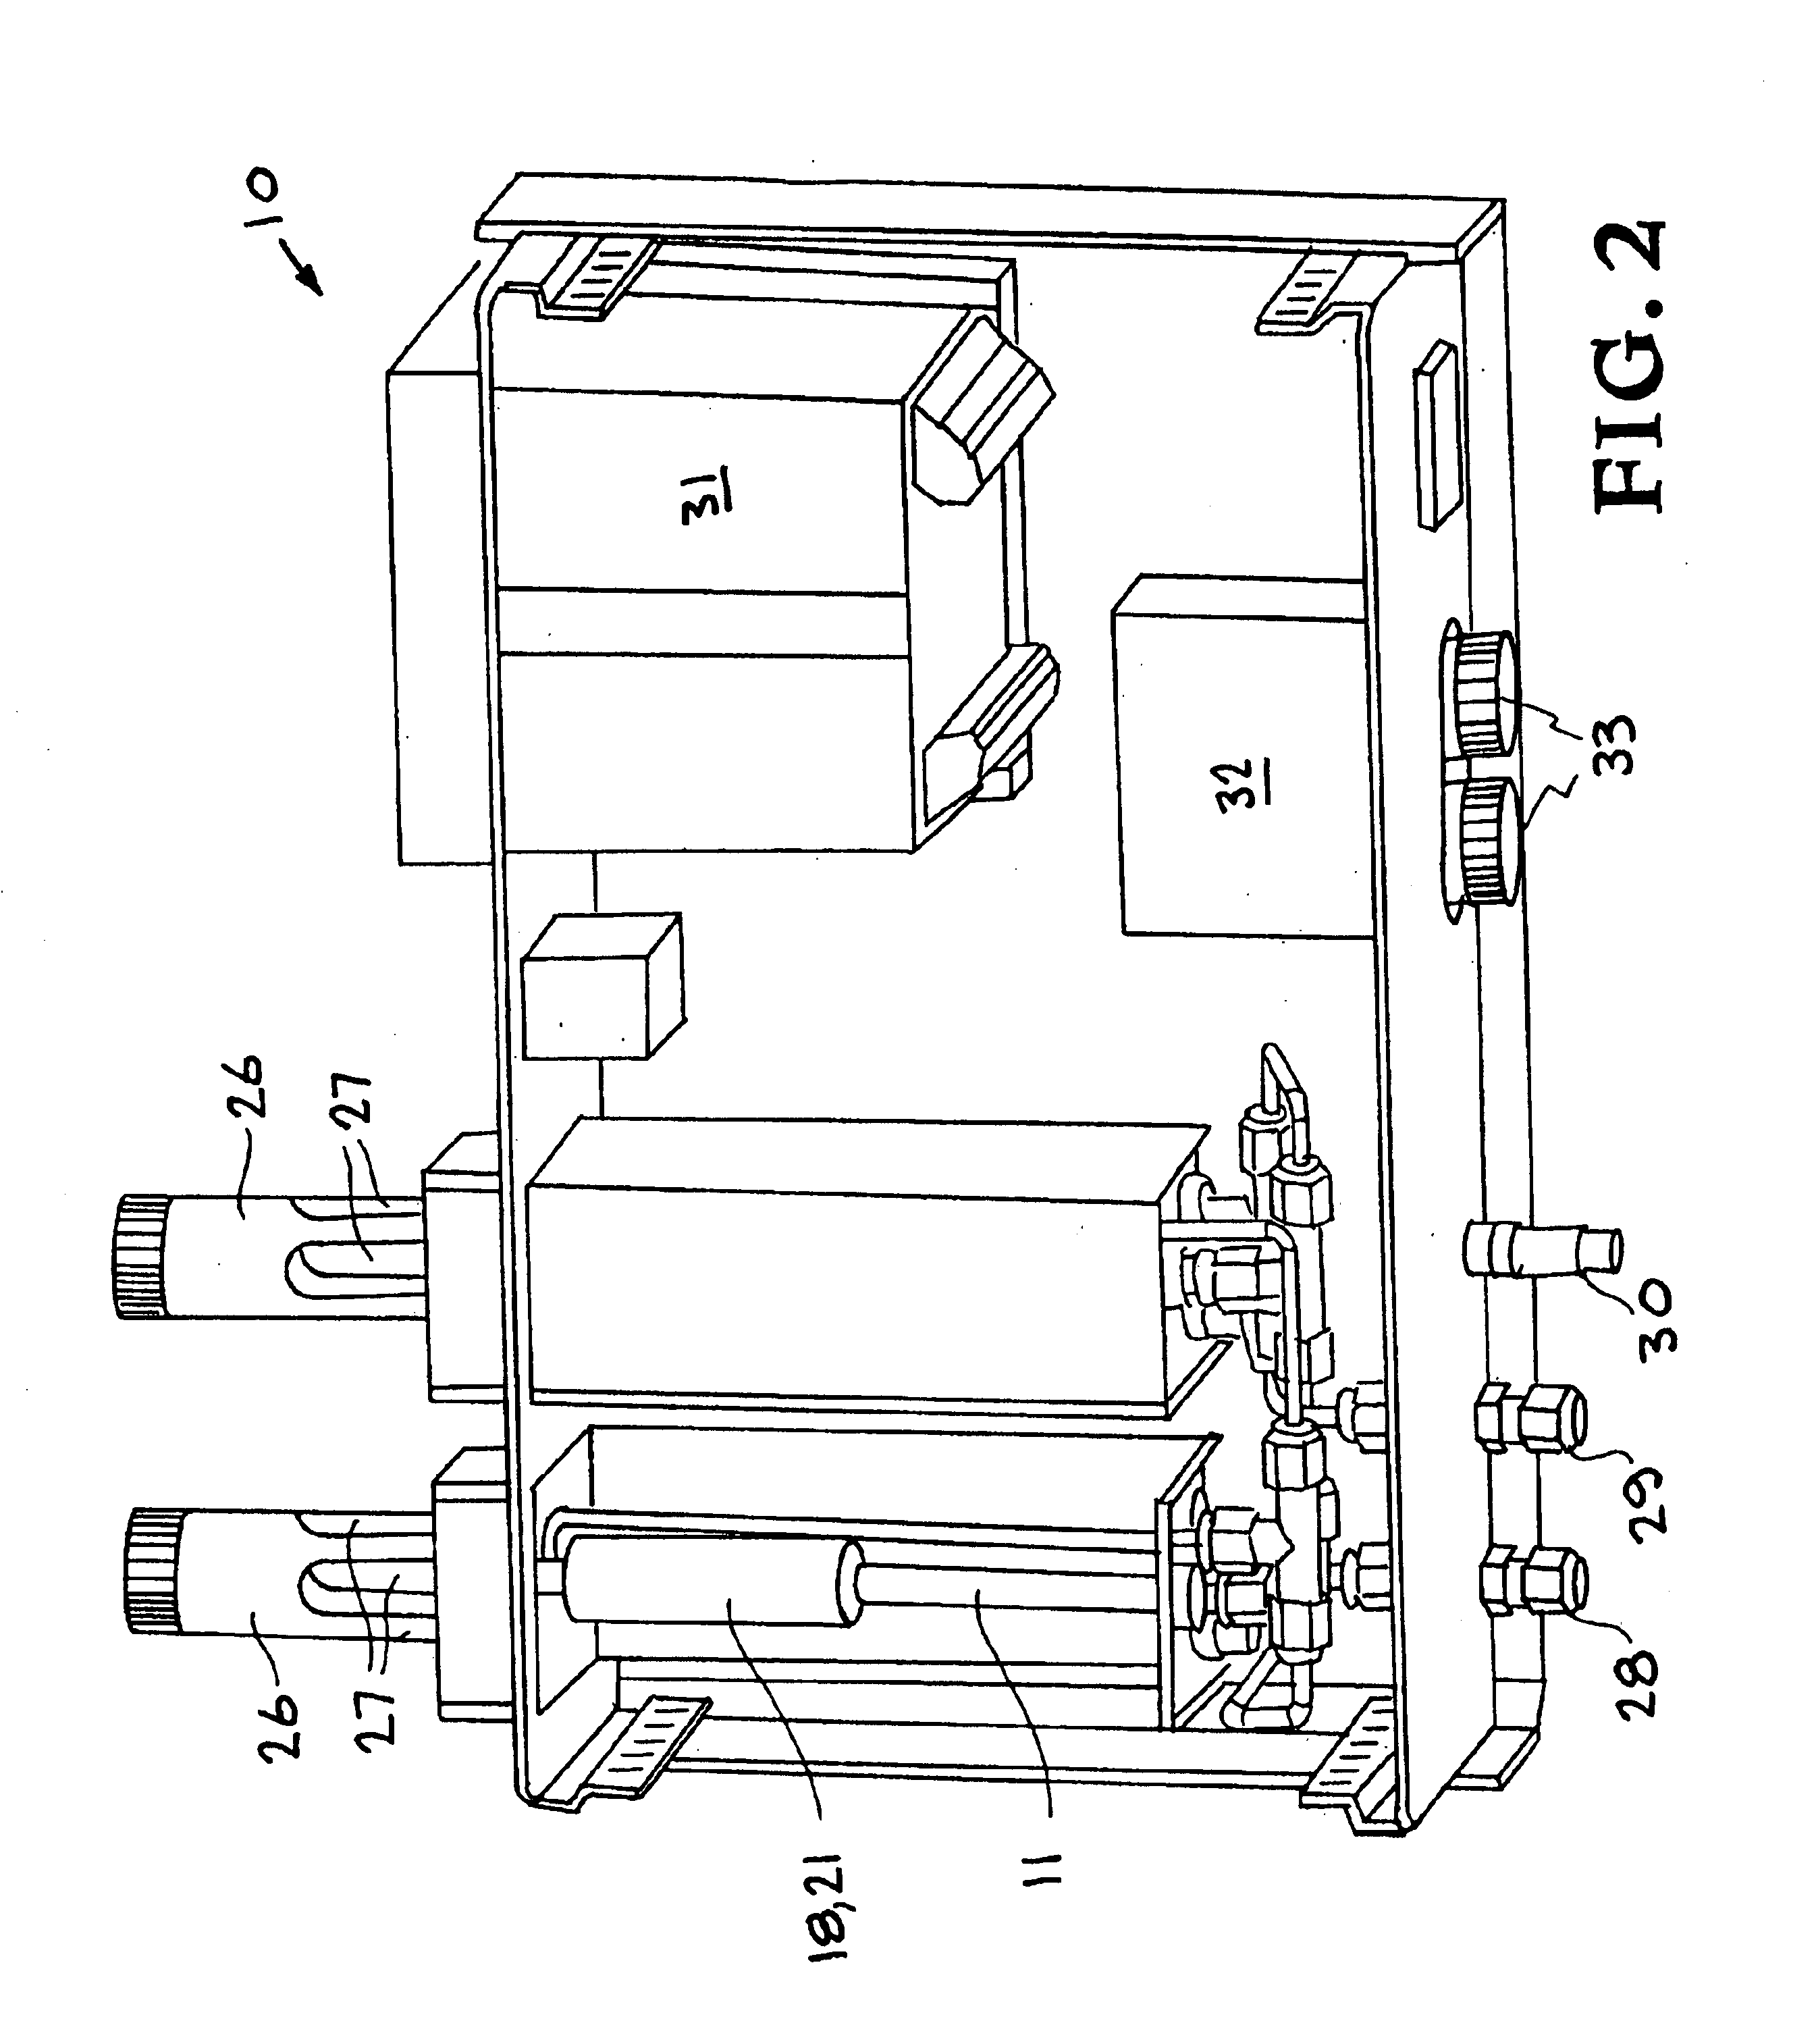 Solid phase microextraction fiber cleaning and conditioning apparatus and method